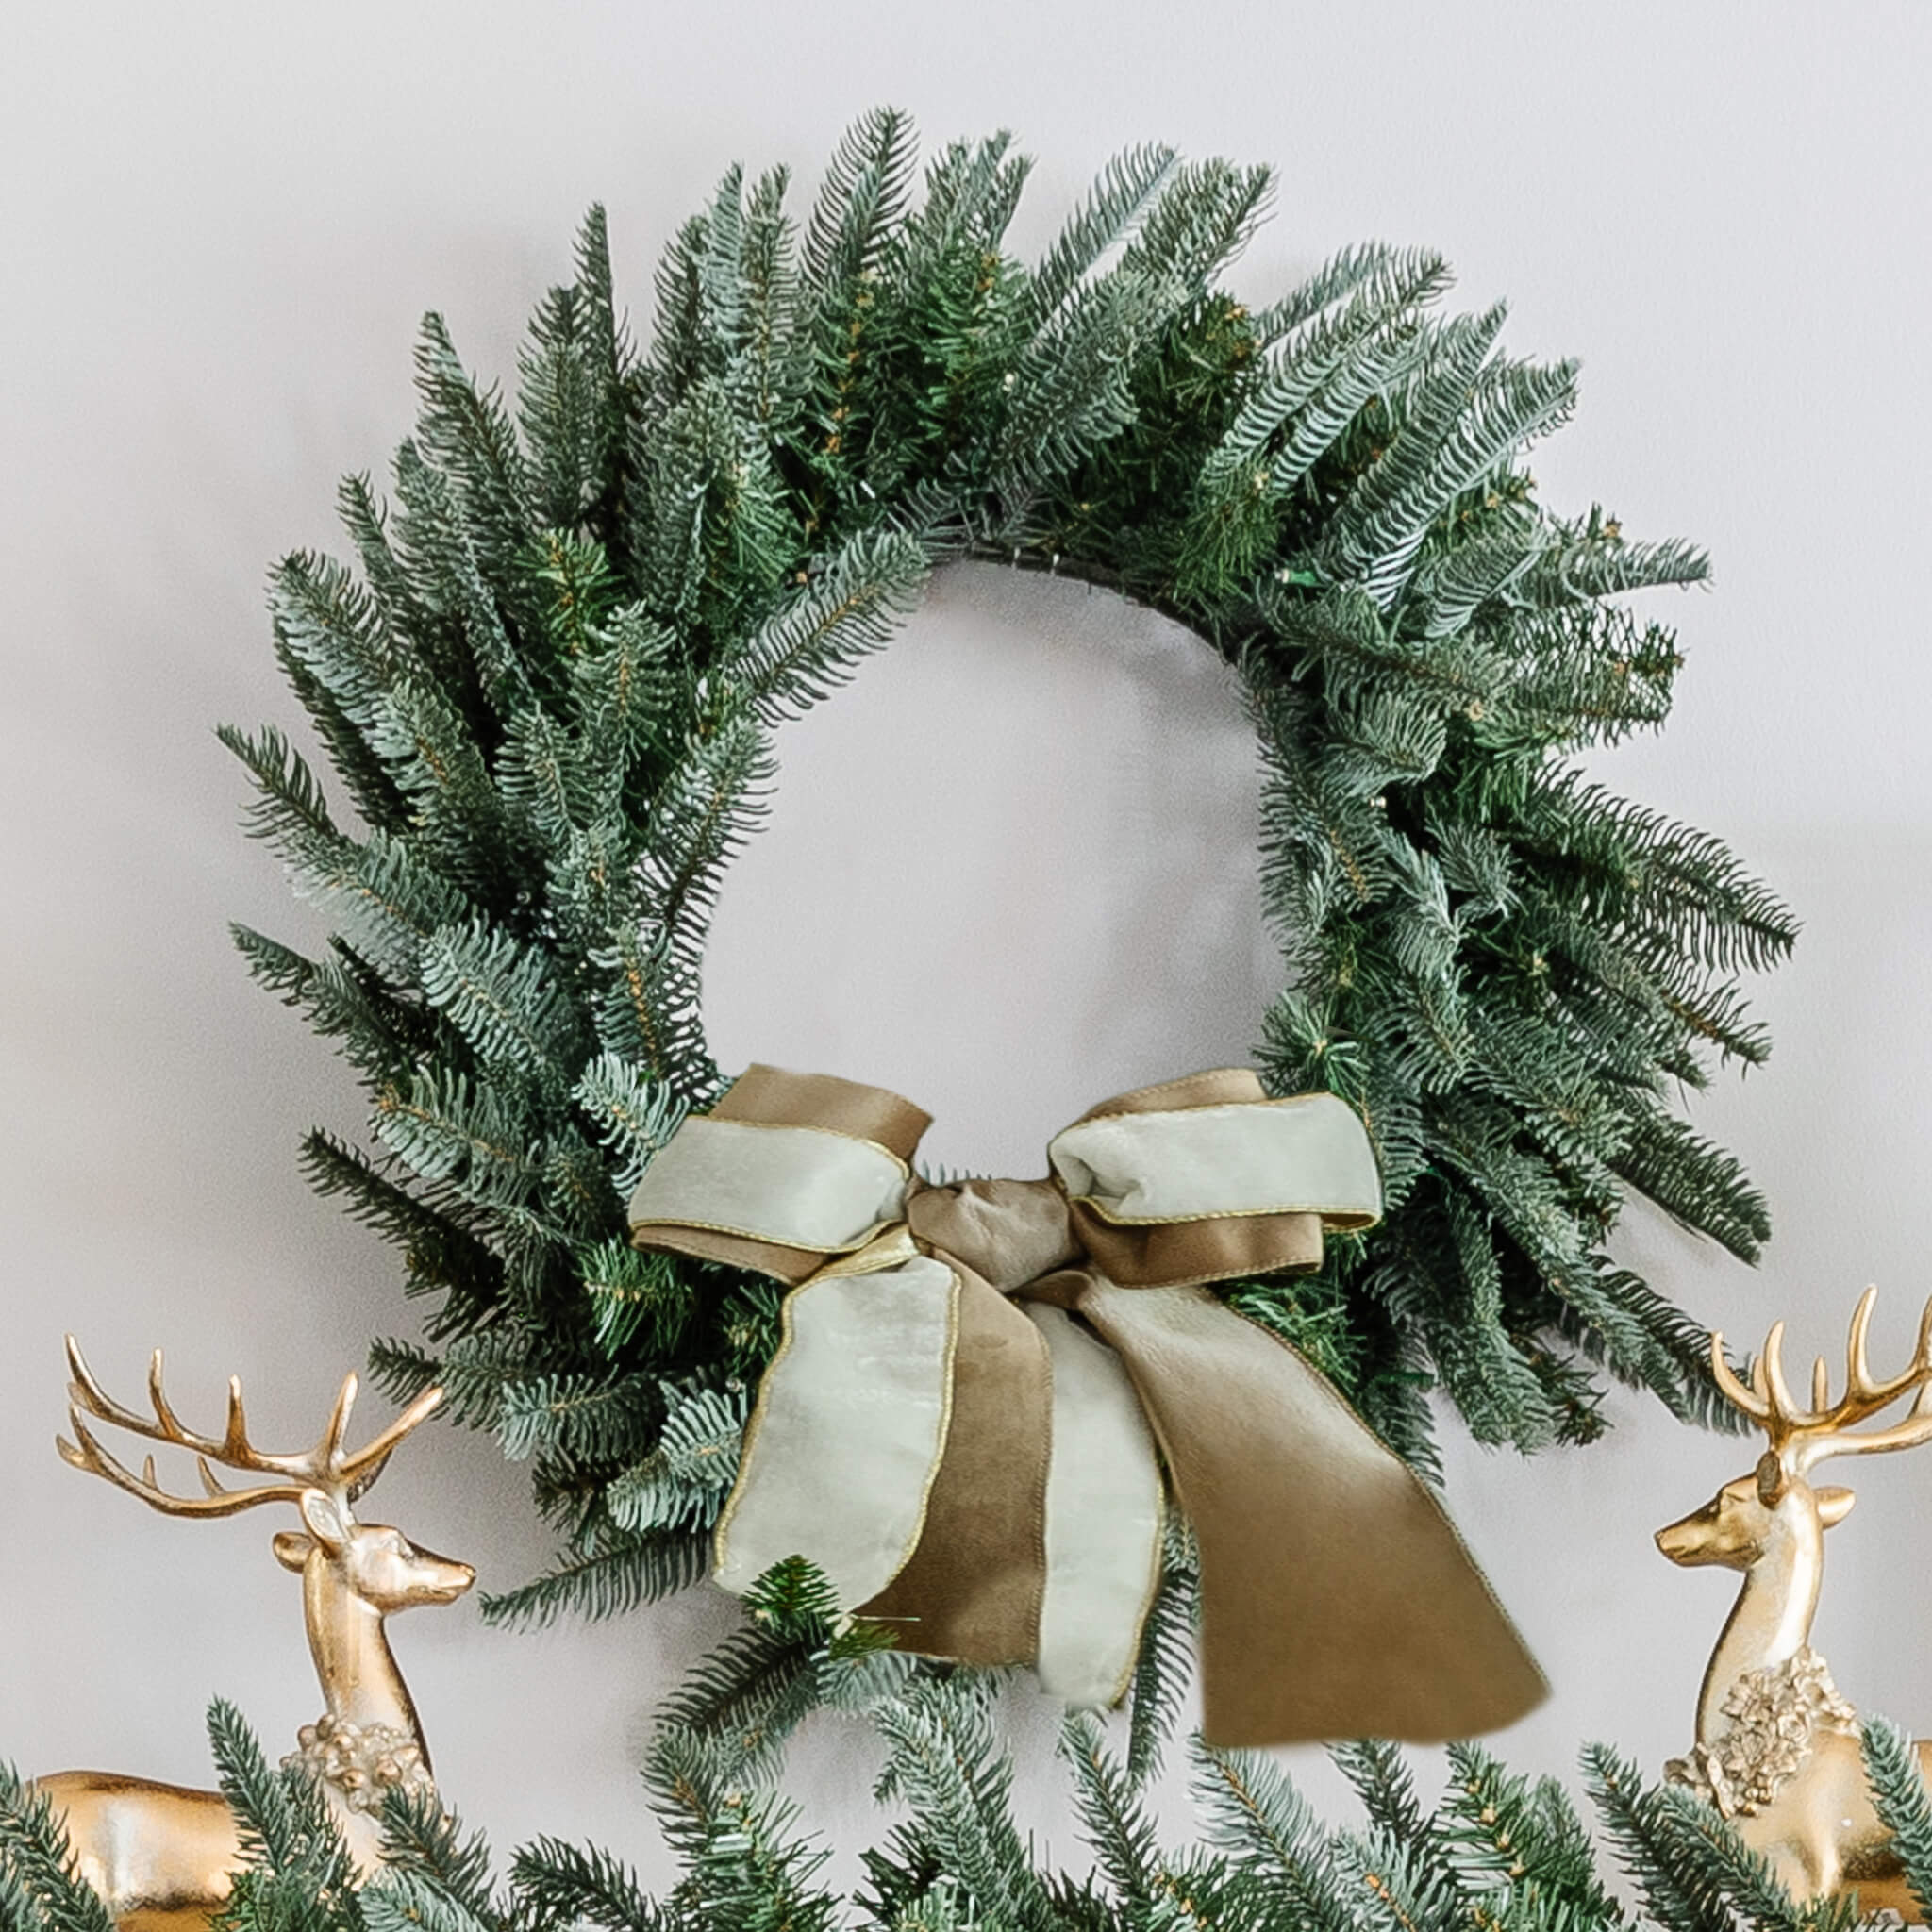 King of Christmas 24" King Noble Fir Wreath with Warm White LED Lights (Battery Operated)